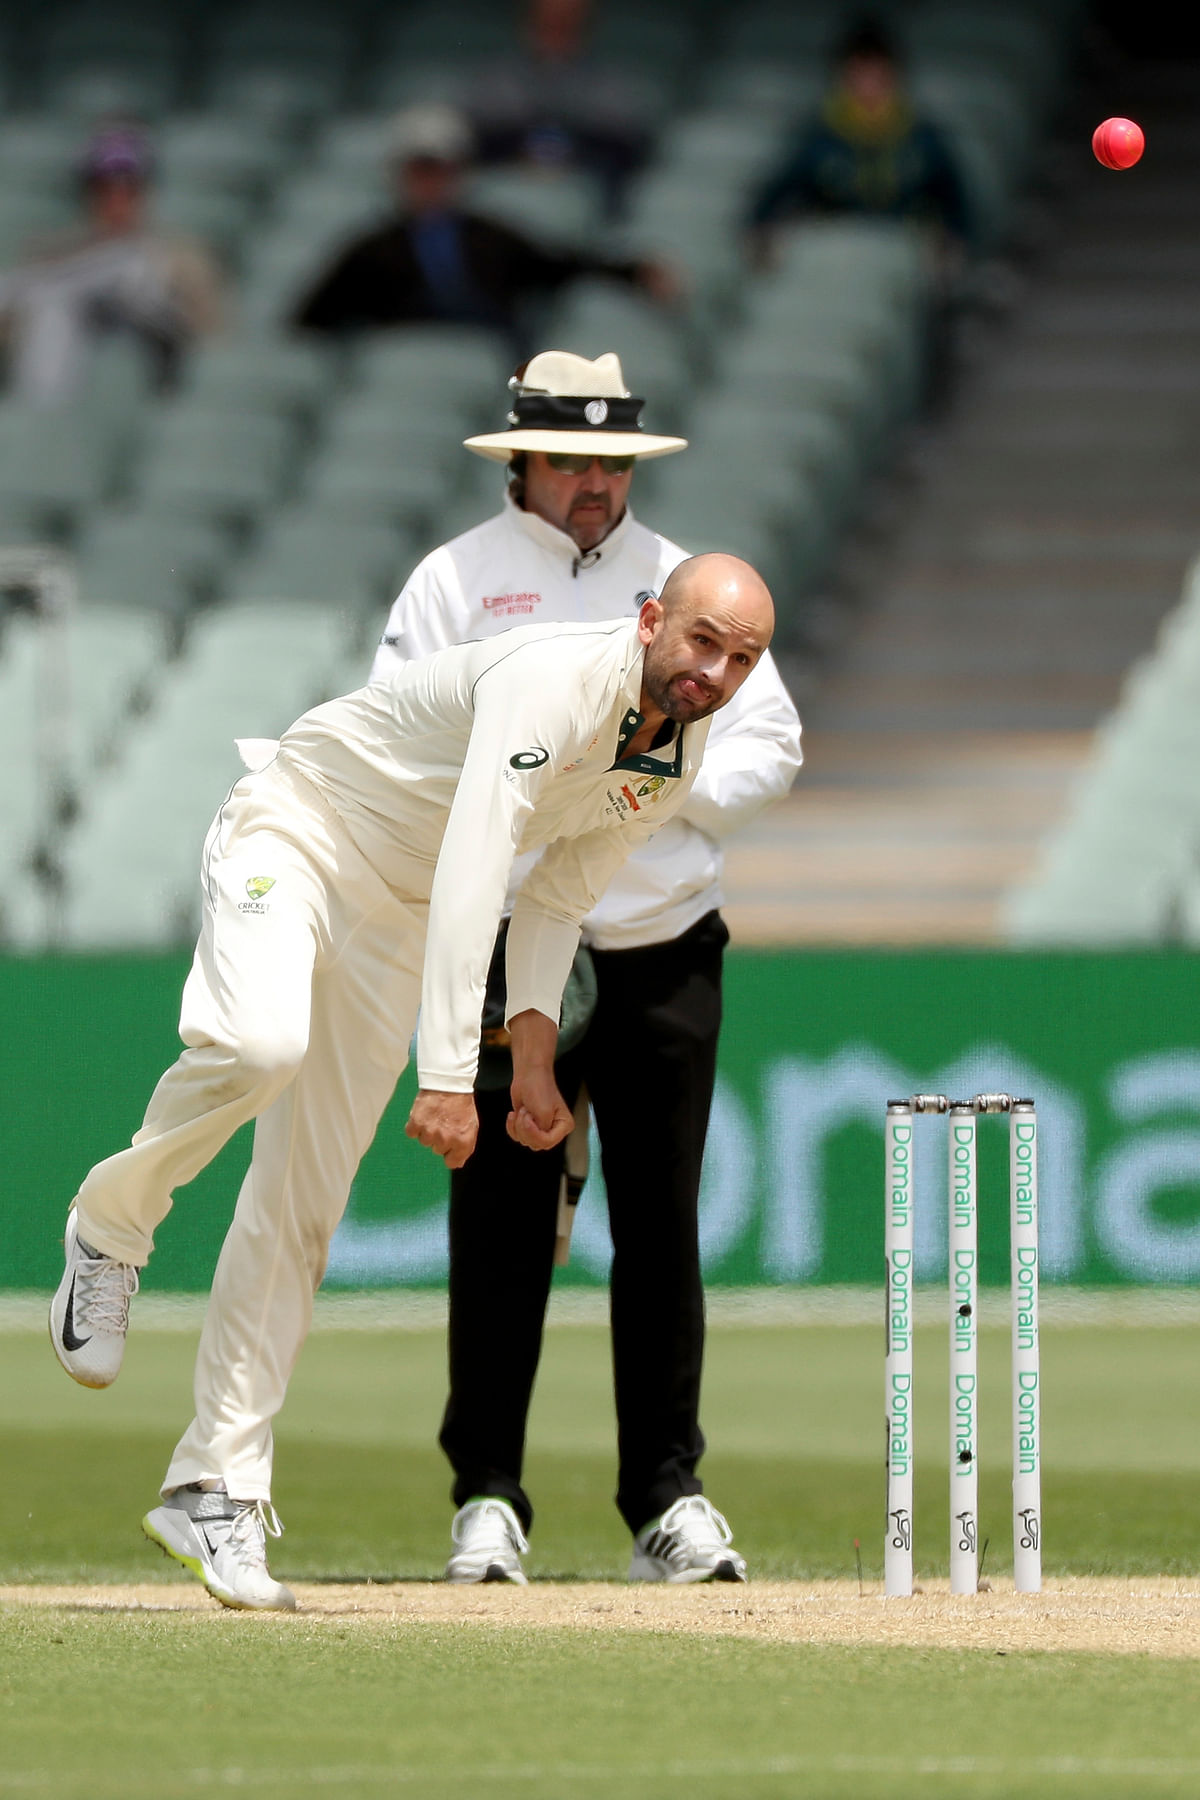 Australia have picked up back-to-back innings victories against Pakistan this series.